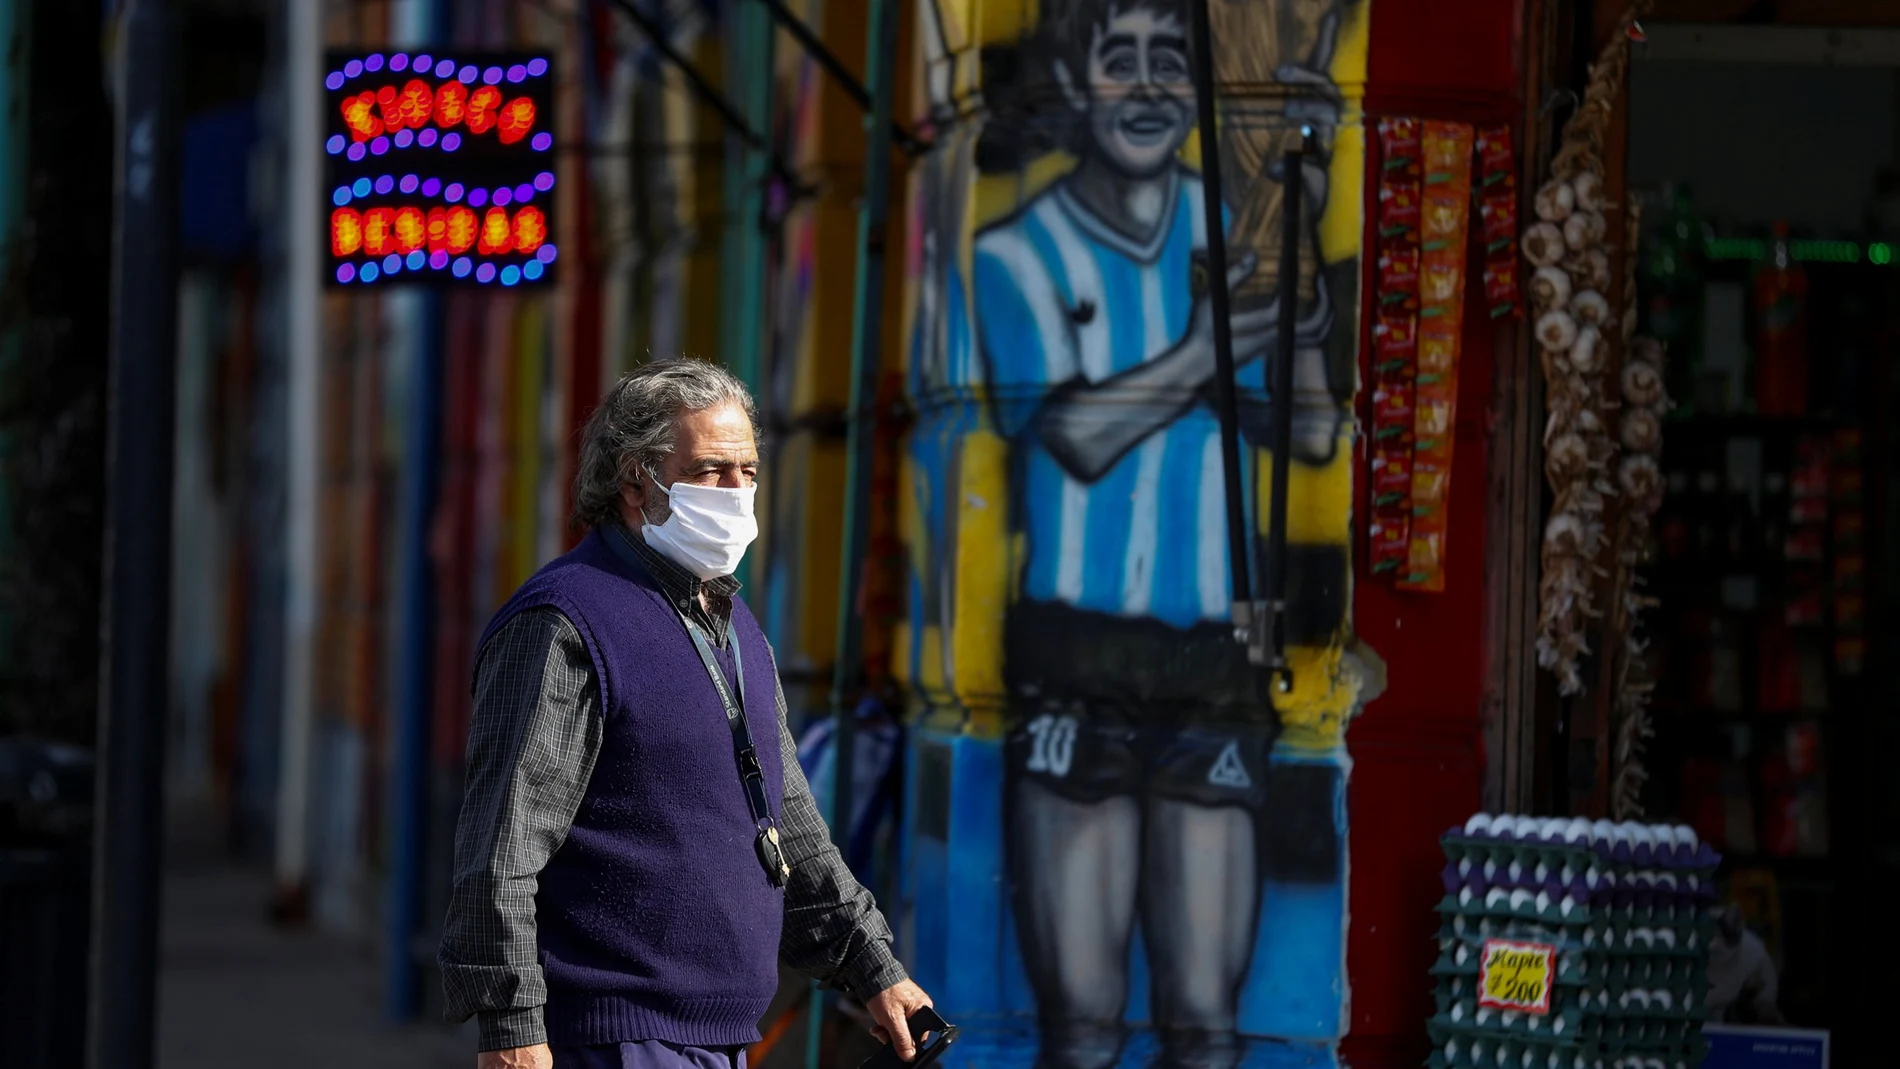 A man wearing a face mask as a preventive measure against the coronavirus disease (COVID-19) walks past a grocery store painted with a graffiti depicting Diego Maradona, after CONMEBOL announced Argentina pulled out hosting the Copa America, in Buenos Aires, Argentina May 31, 2021. REUTERS/Agustin Marcarian